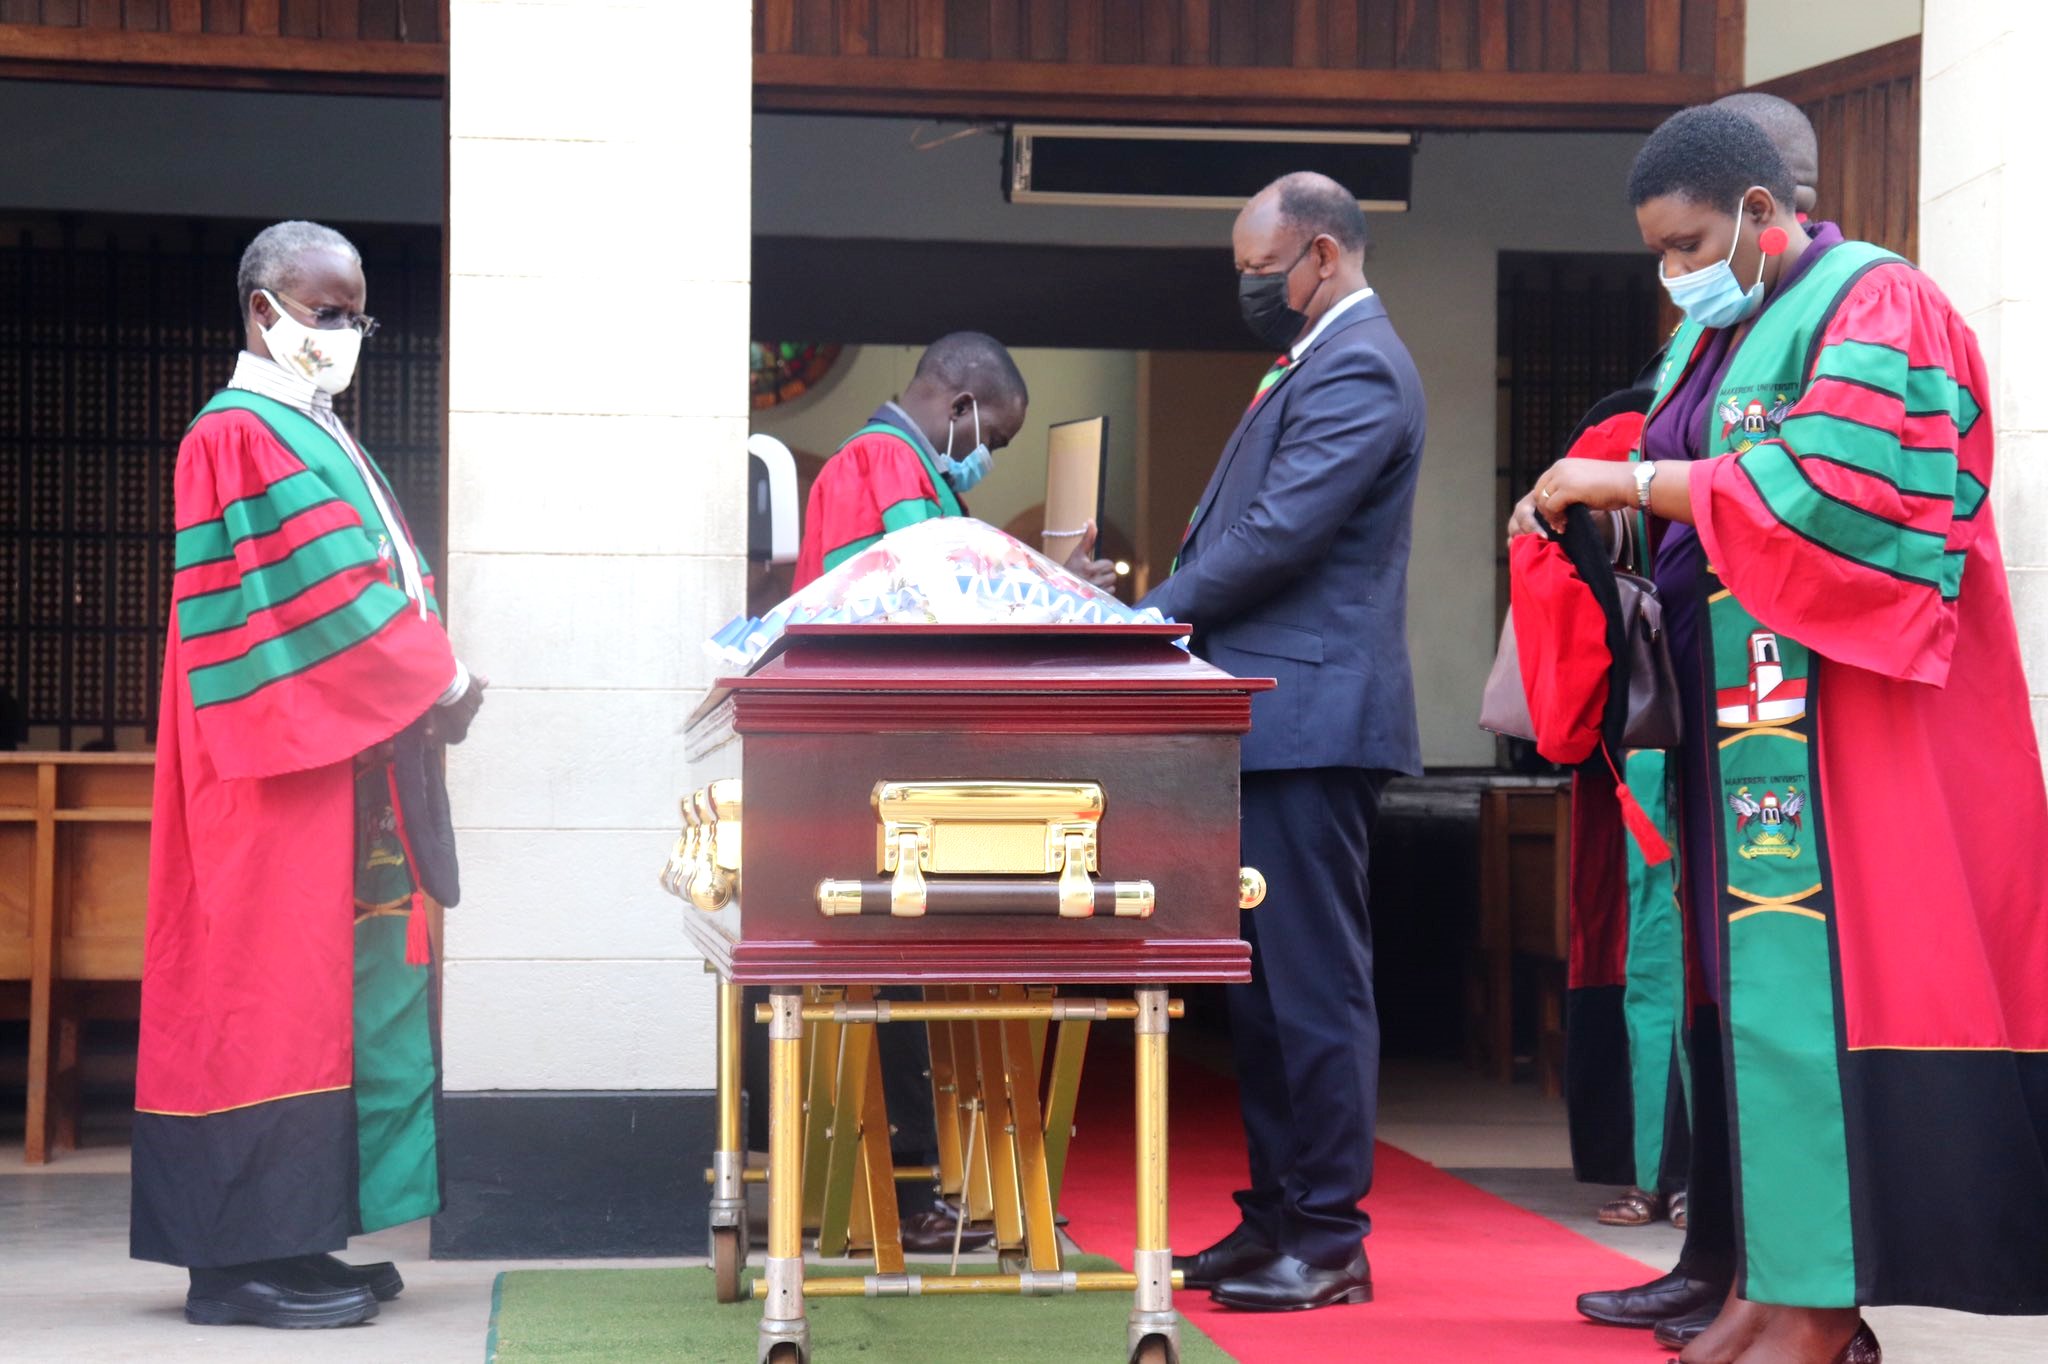 The Vice Chancellor, Prof. Barnabas Nawangwe (2nd R) is joined by Dr. William Tayeebwa (L) and other Academic Staff to pay the last respects to Eng. Prof. Anthony G. Kerali on 23rd February 2021, St. Augustine Chapel, Makerere University.